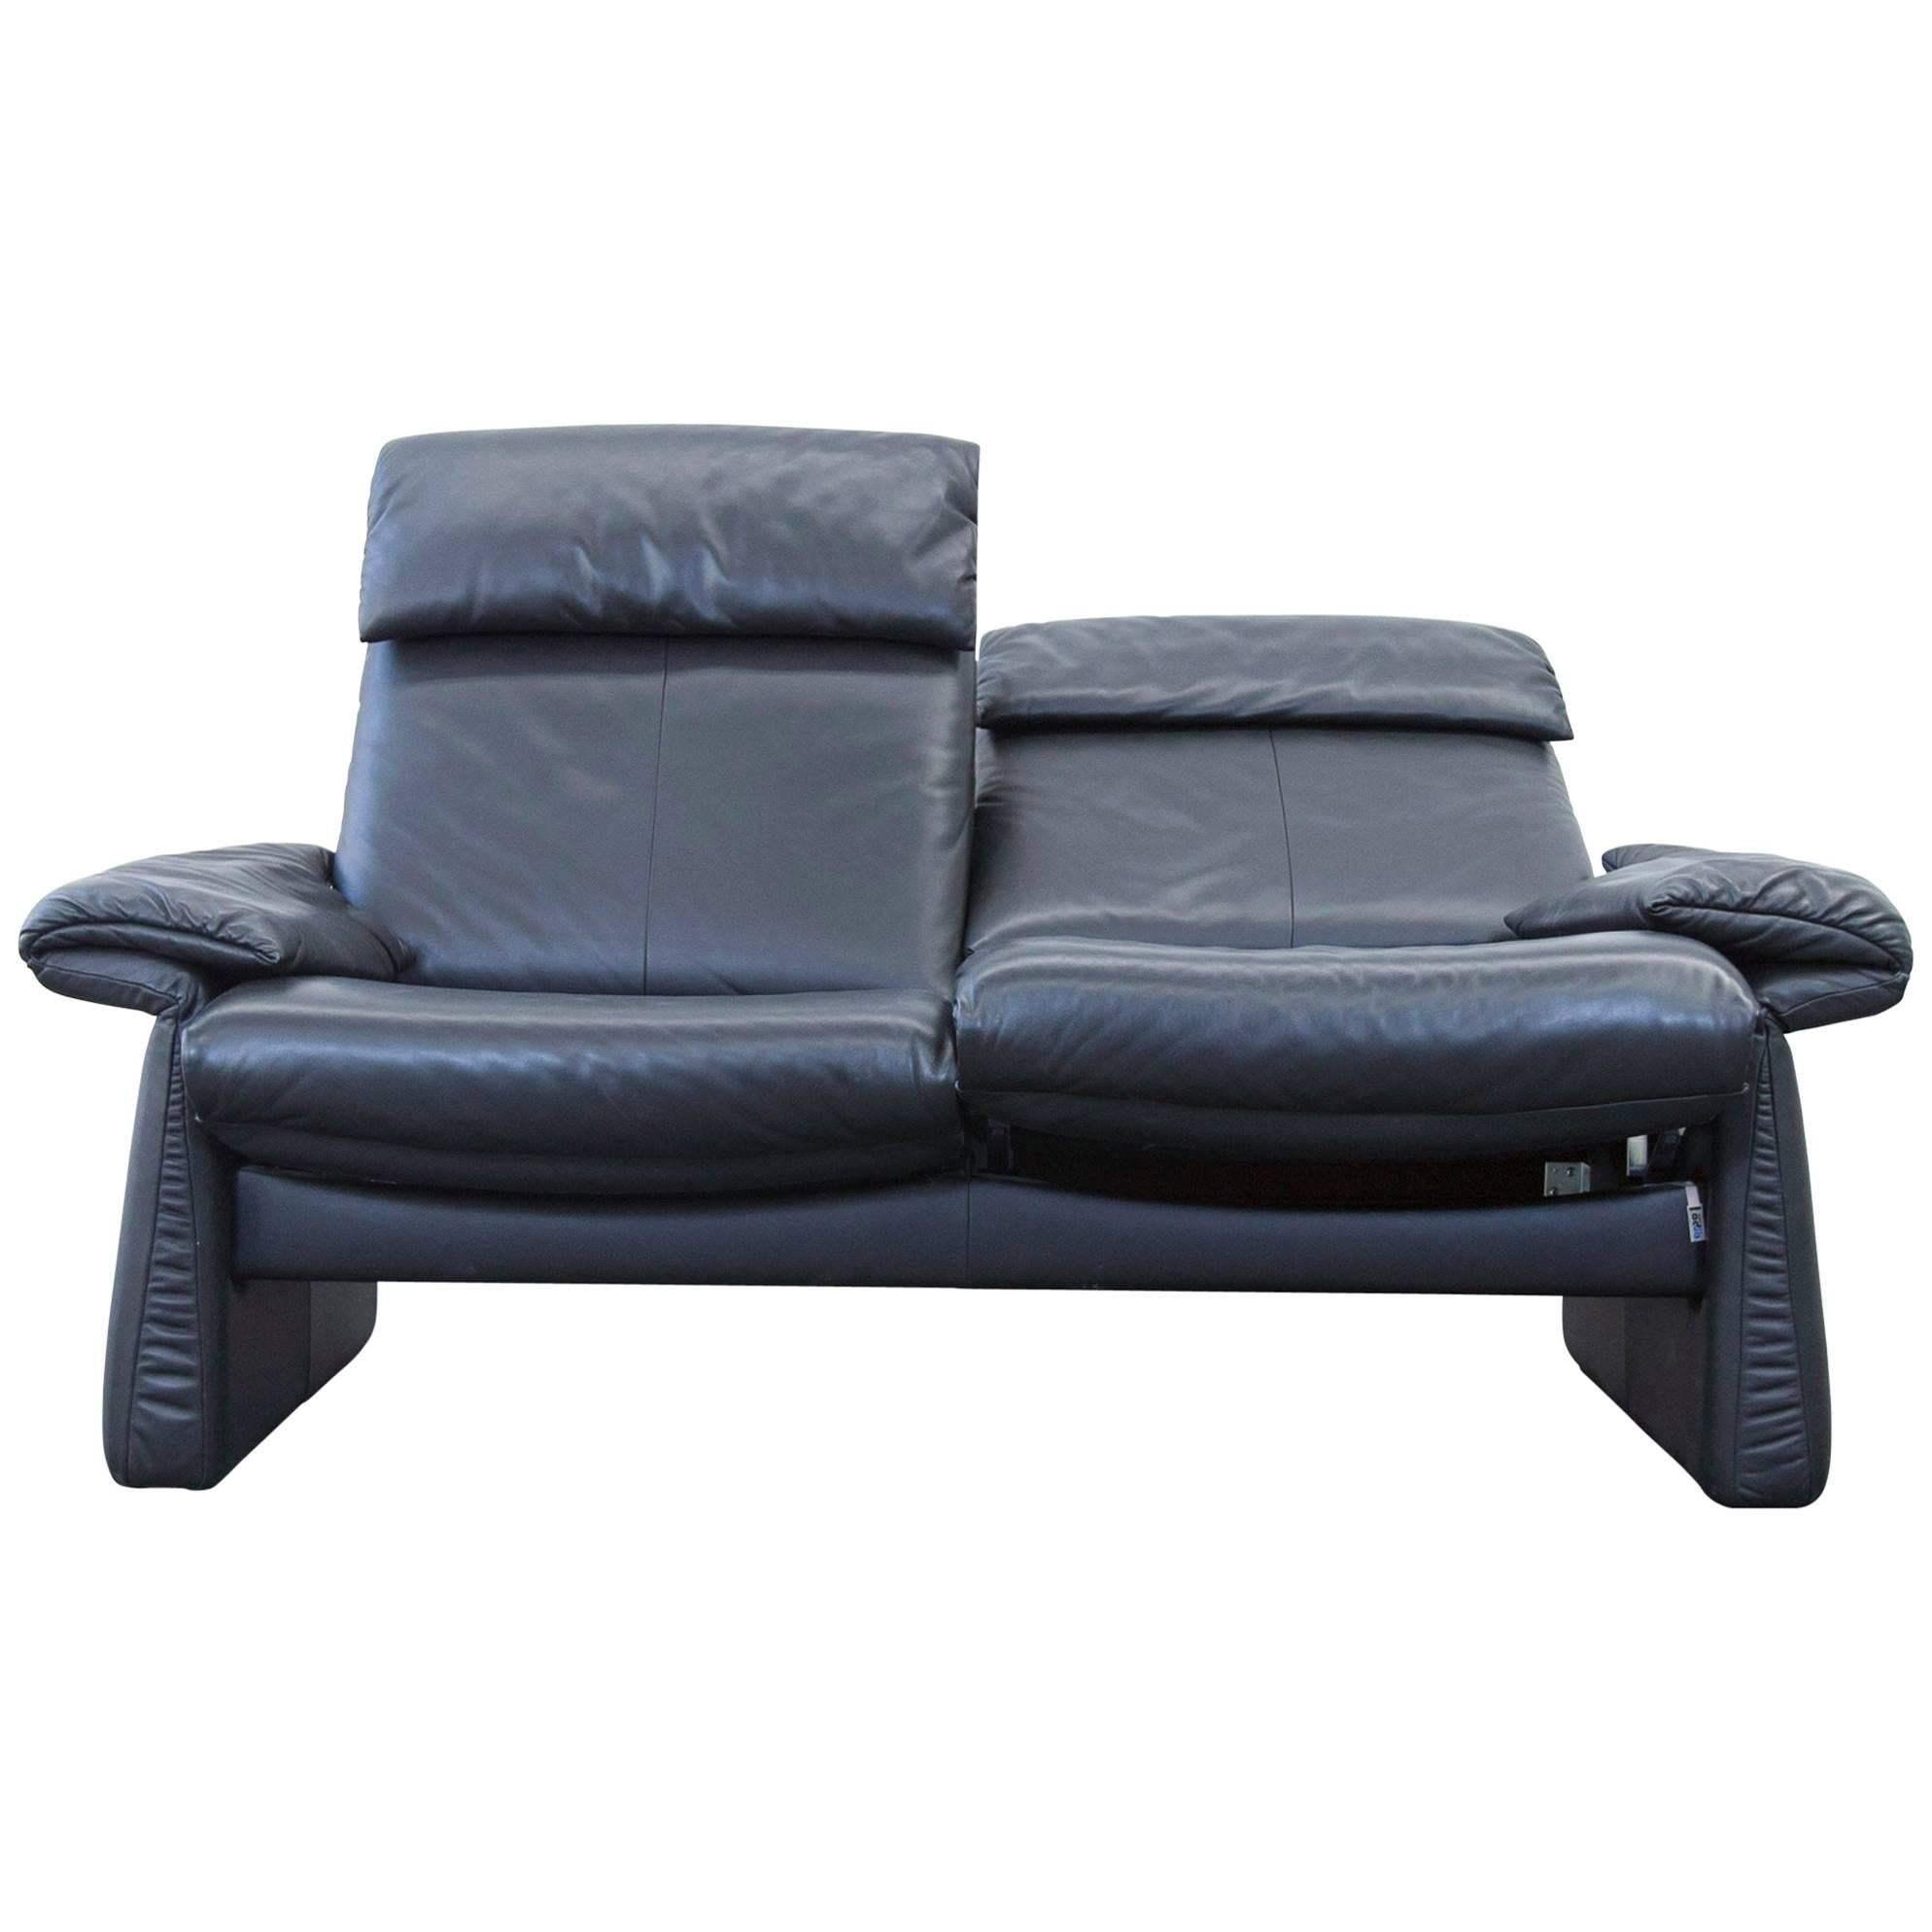 Erpo Designer Leather Sofa Black Two-Seat Couch Relax Function Modern For Sale